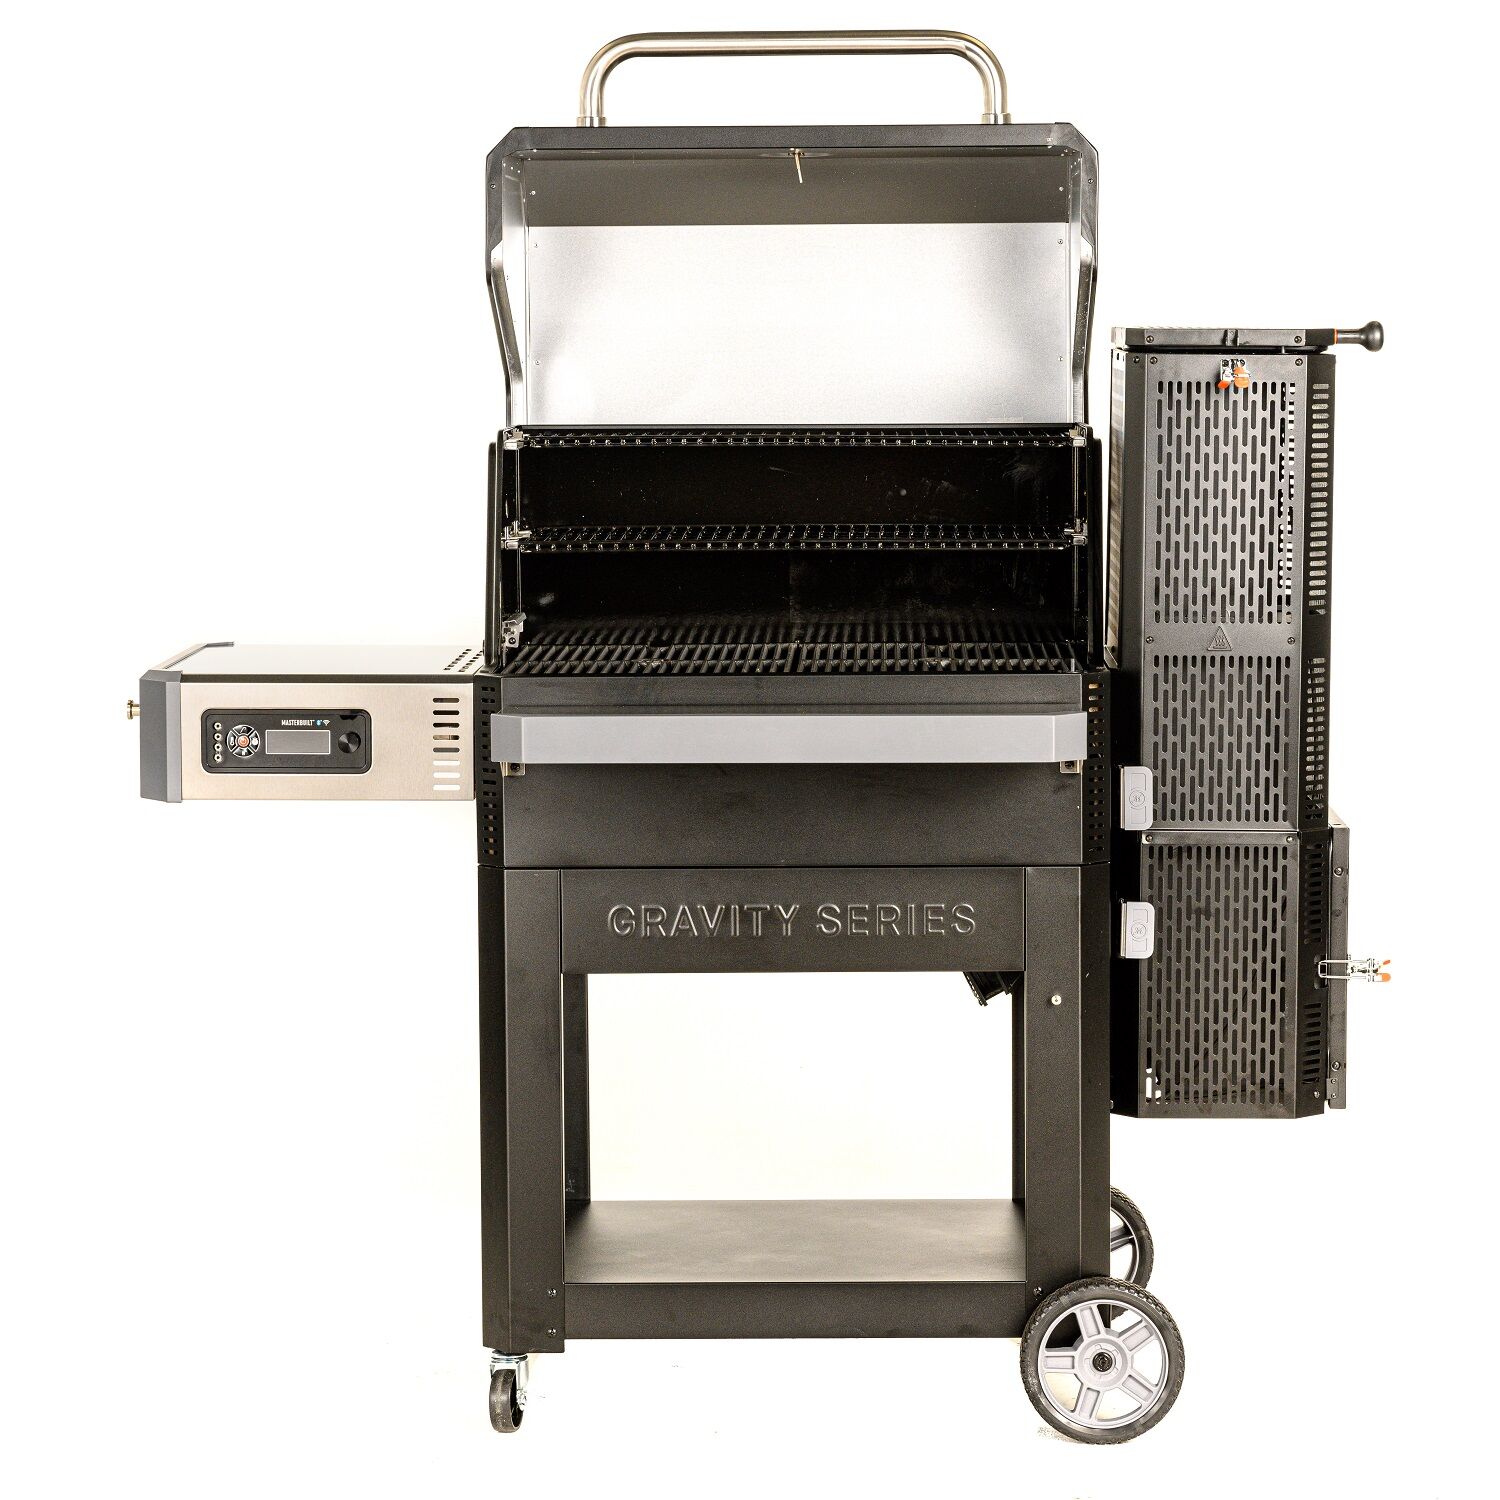 MASTERBUILT Digital Charcoal Grill & Smoker GRAVITY FED 1050 MB20041320 offen